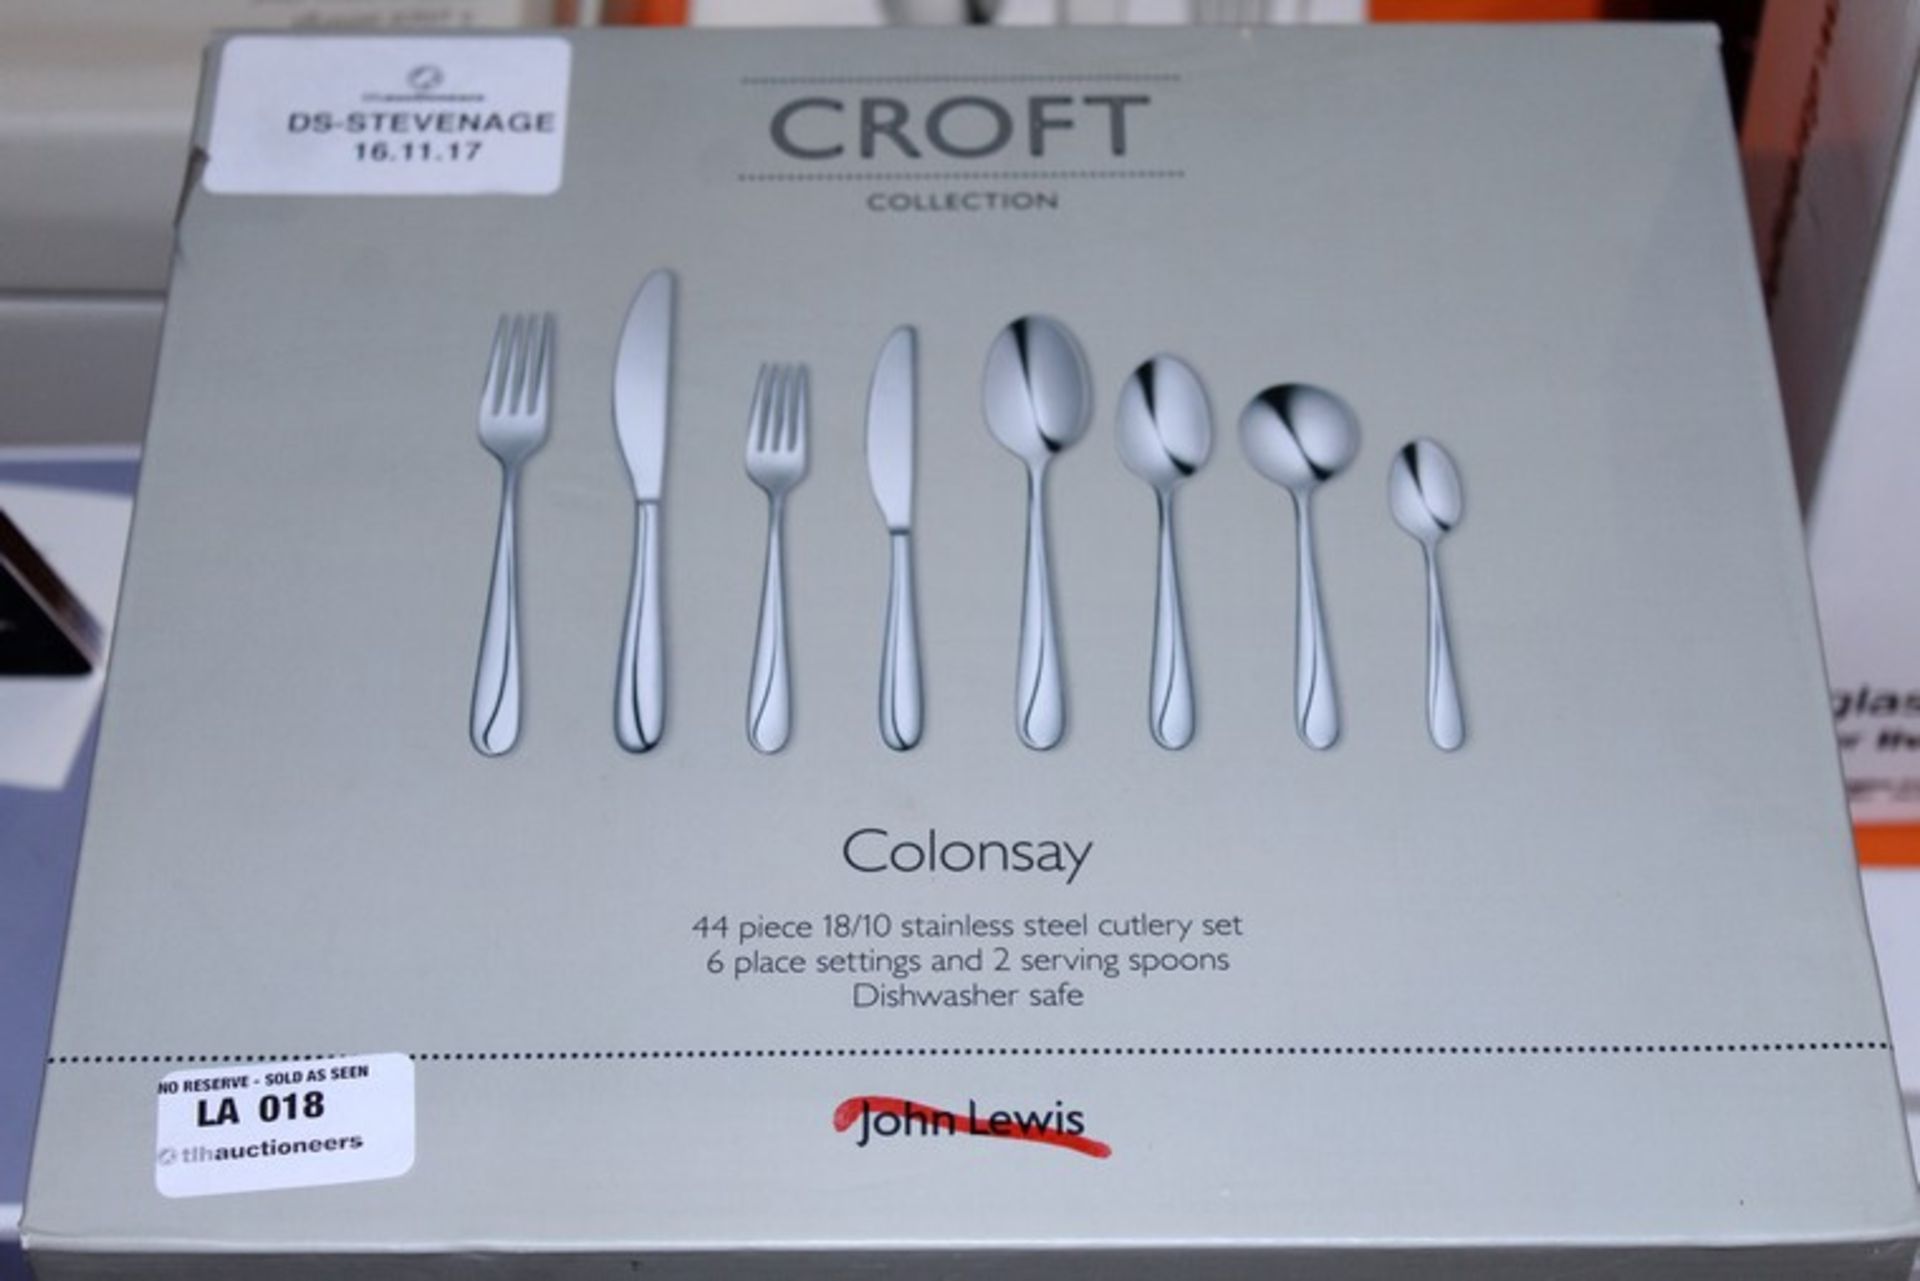 1 x BOXED CROFT COLLECTION 44 PIECE CUTTLERY SET RRP £100 (16/11/17) *PLEASE NOTE THAT THE BID PRICE